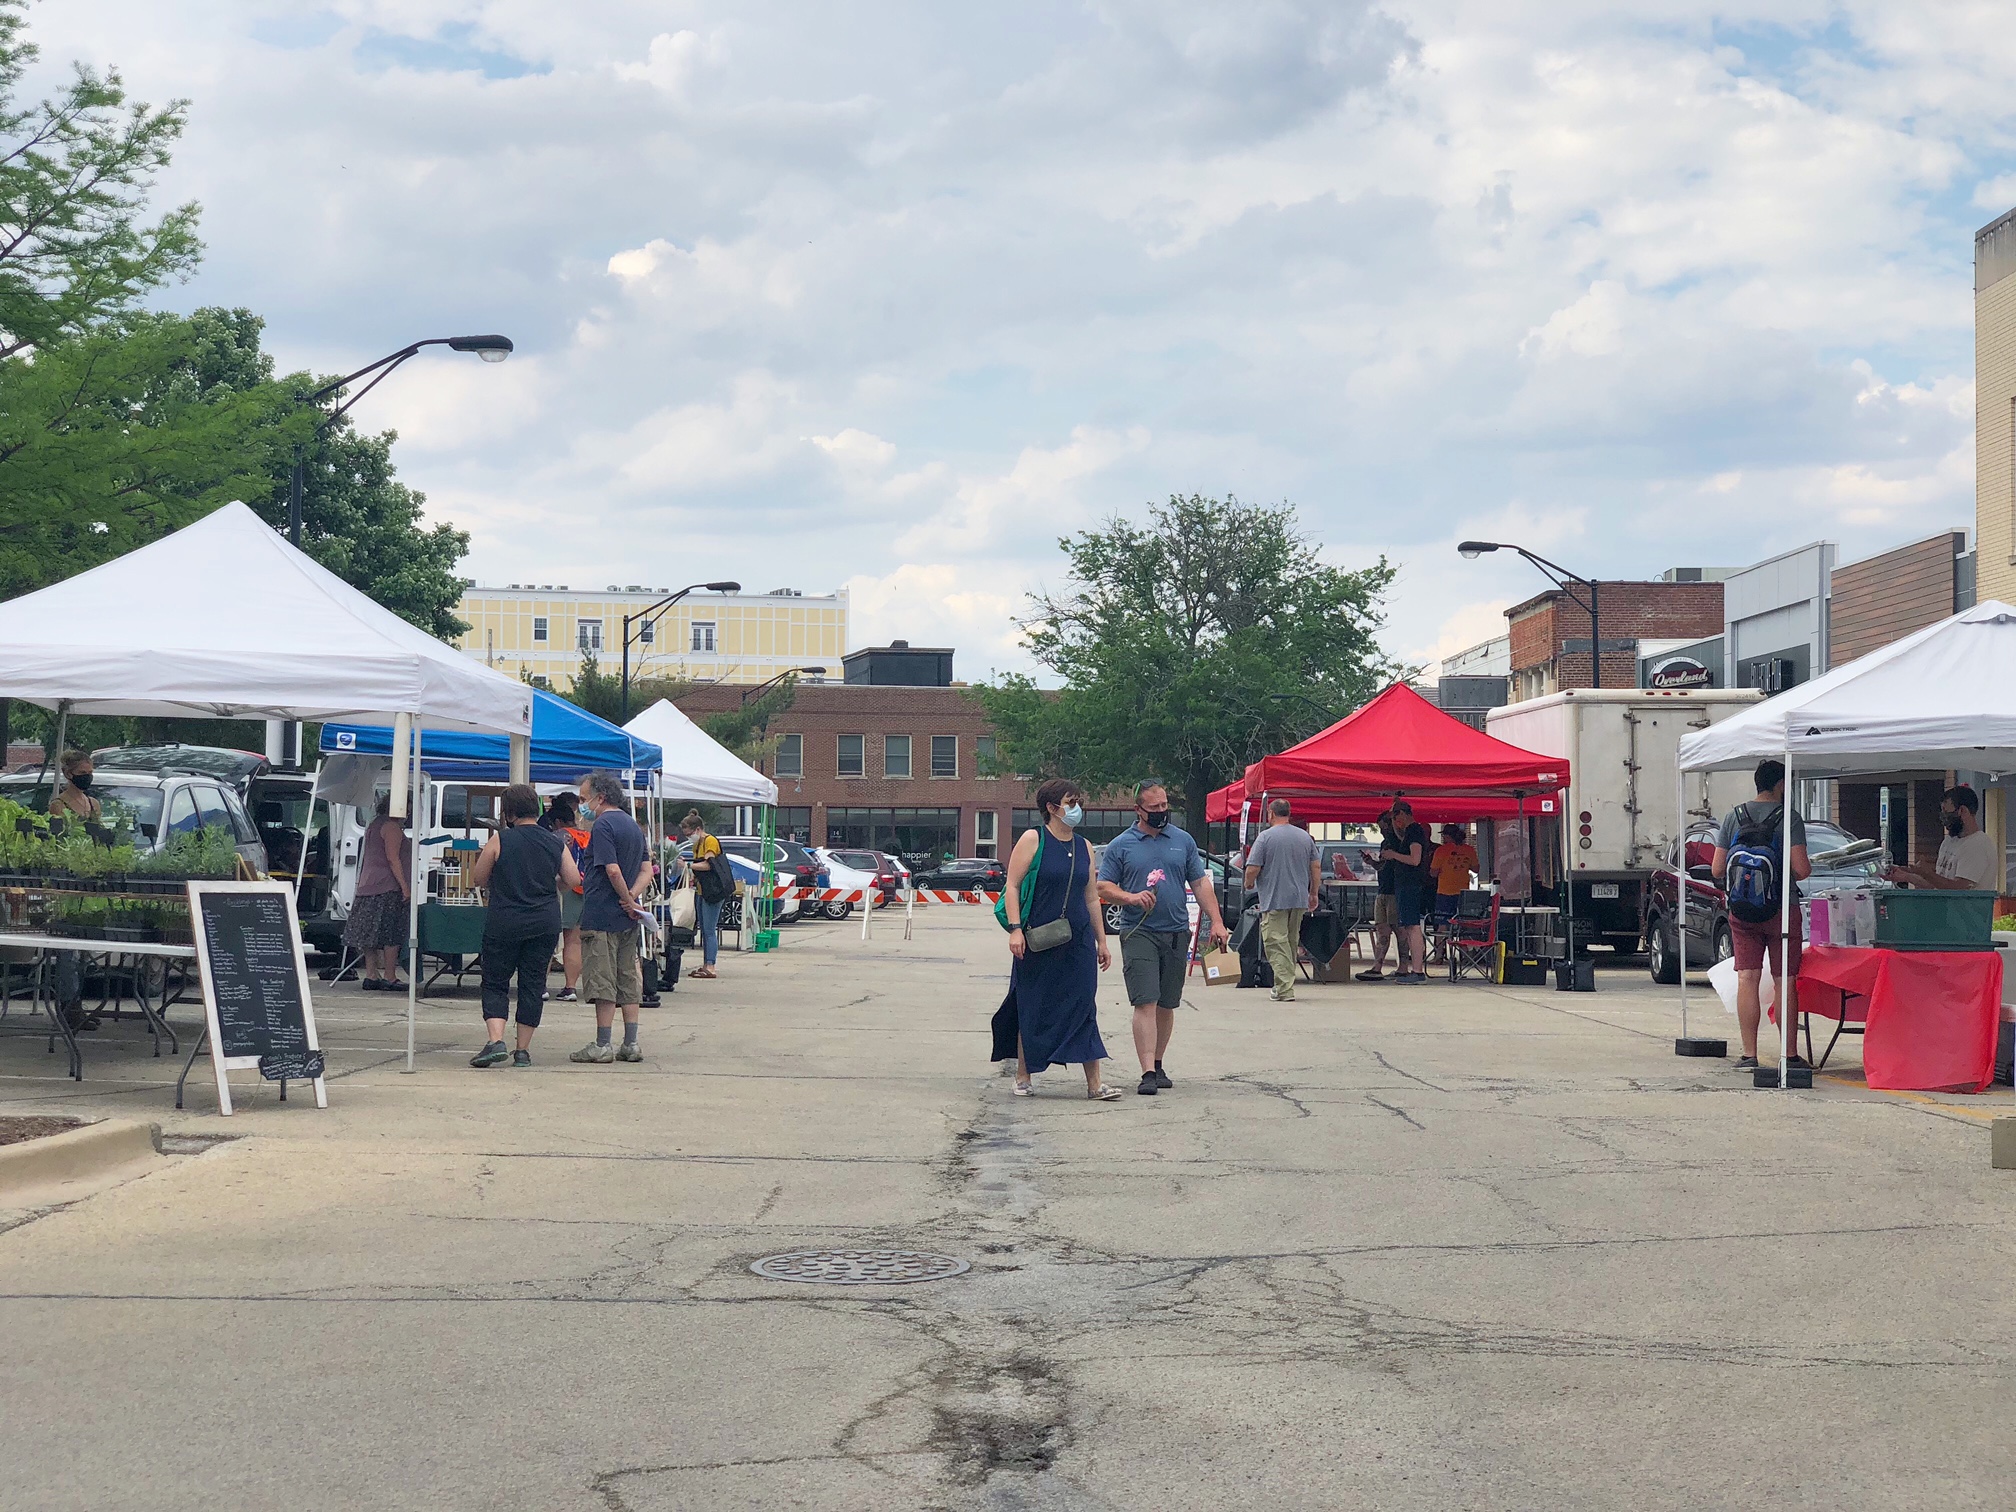 Shoppers are masked and walking around the Champaign Farmer's Market. Photo by Alyssa Buckley.